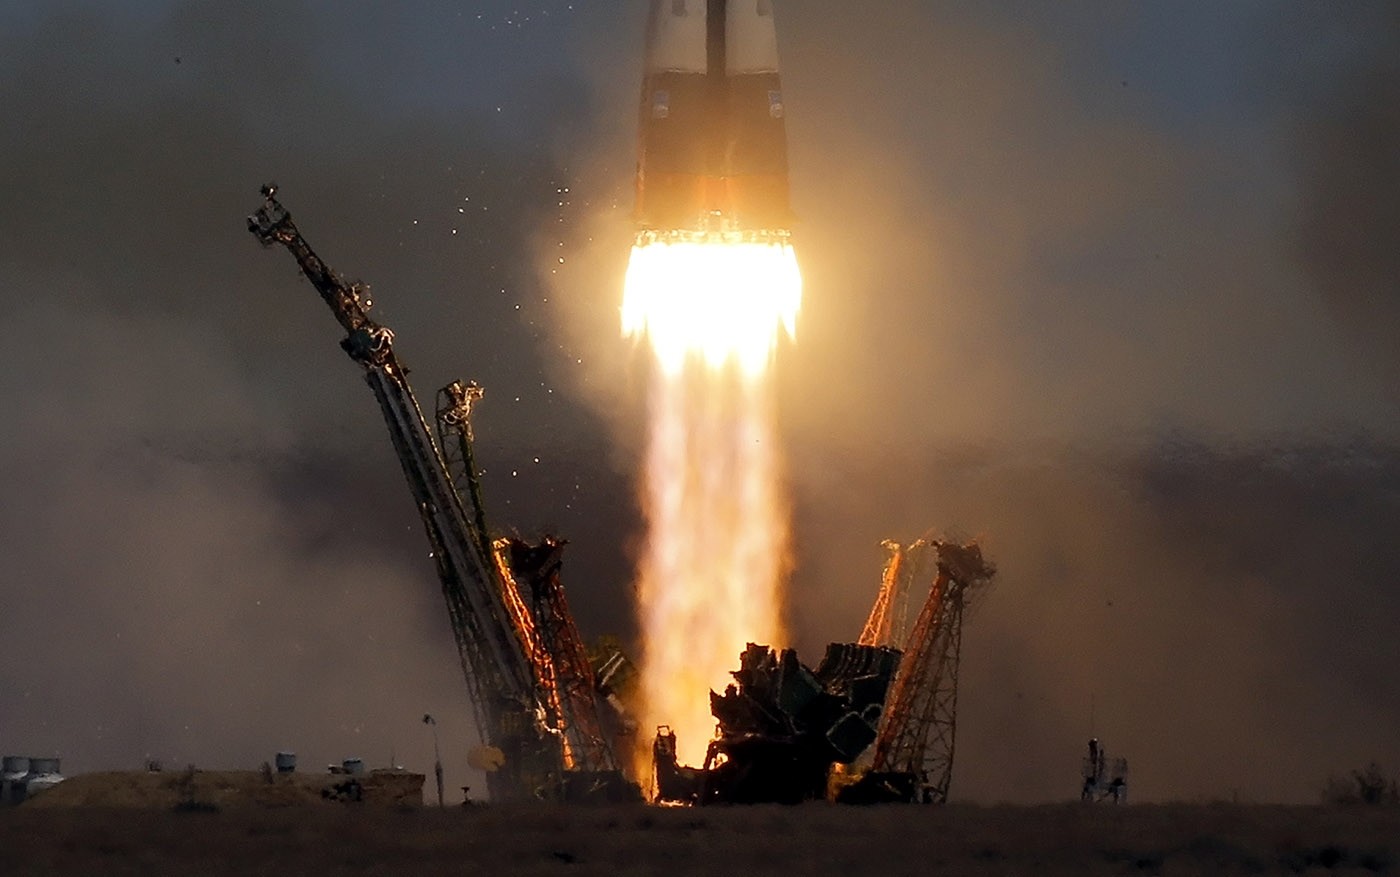 Soyuz capsule carrying American, Russian duo blasts off for space station